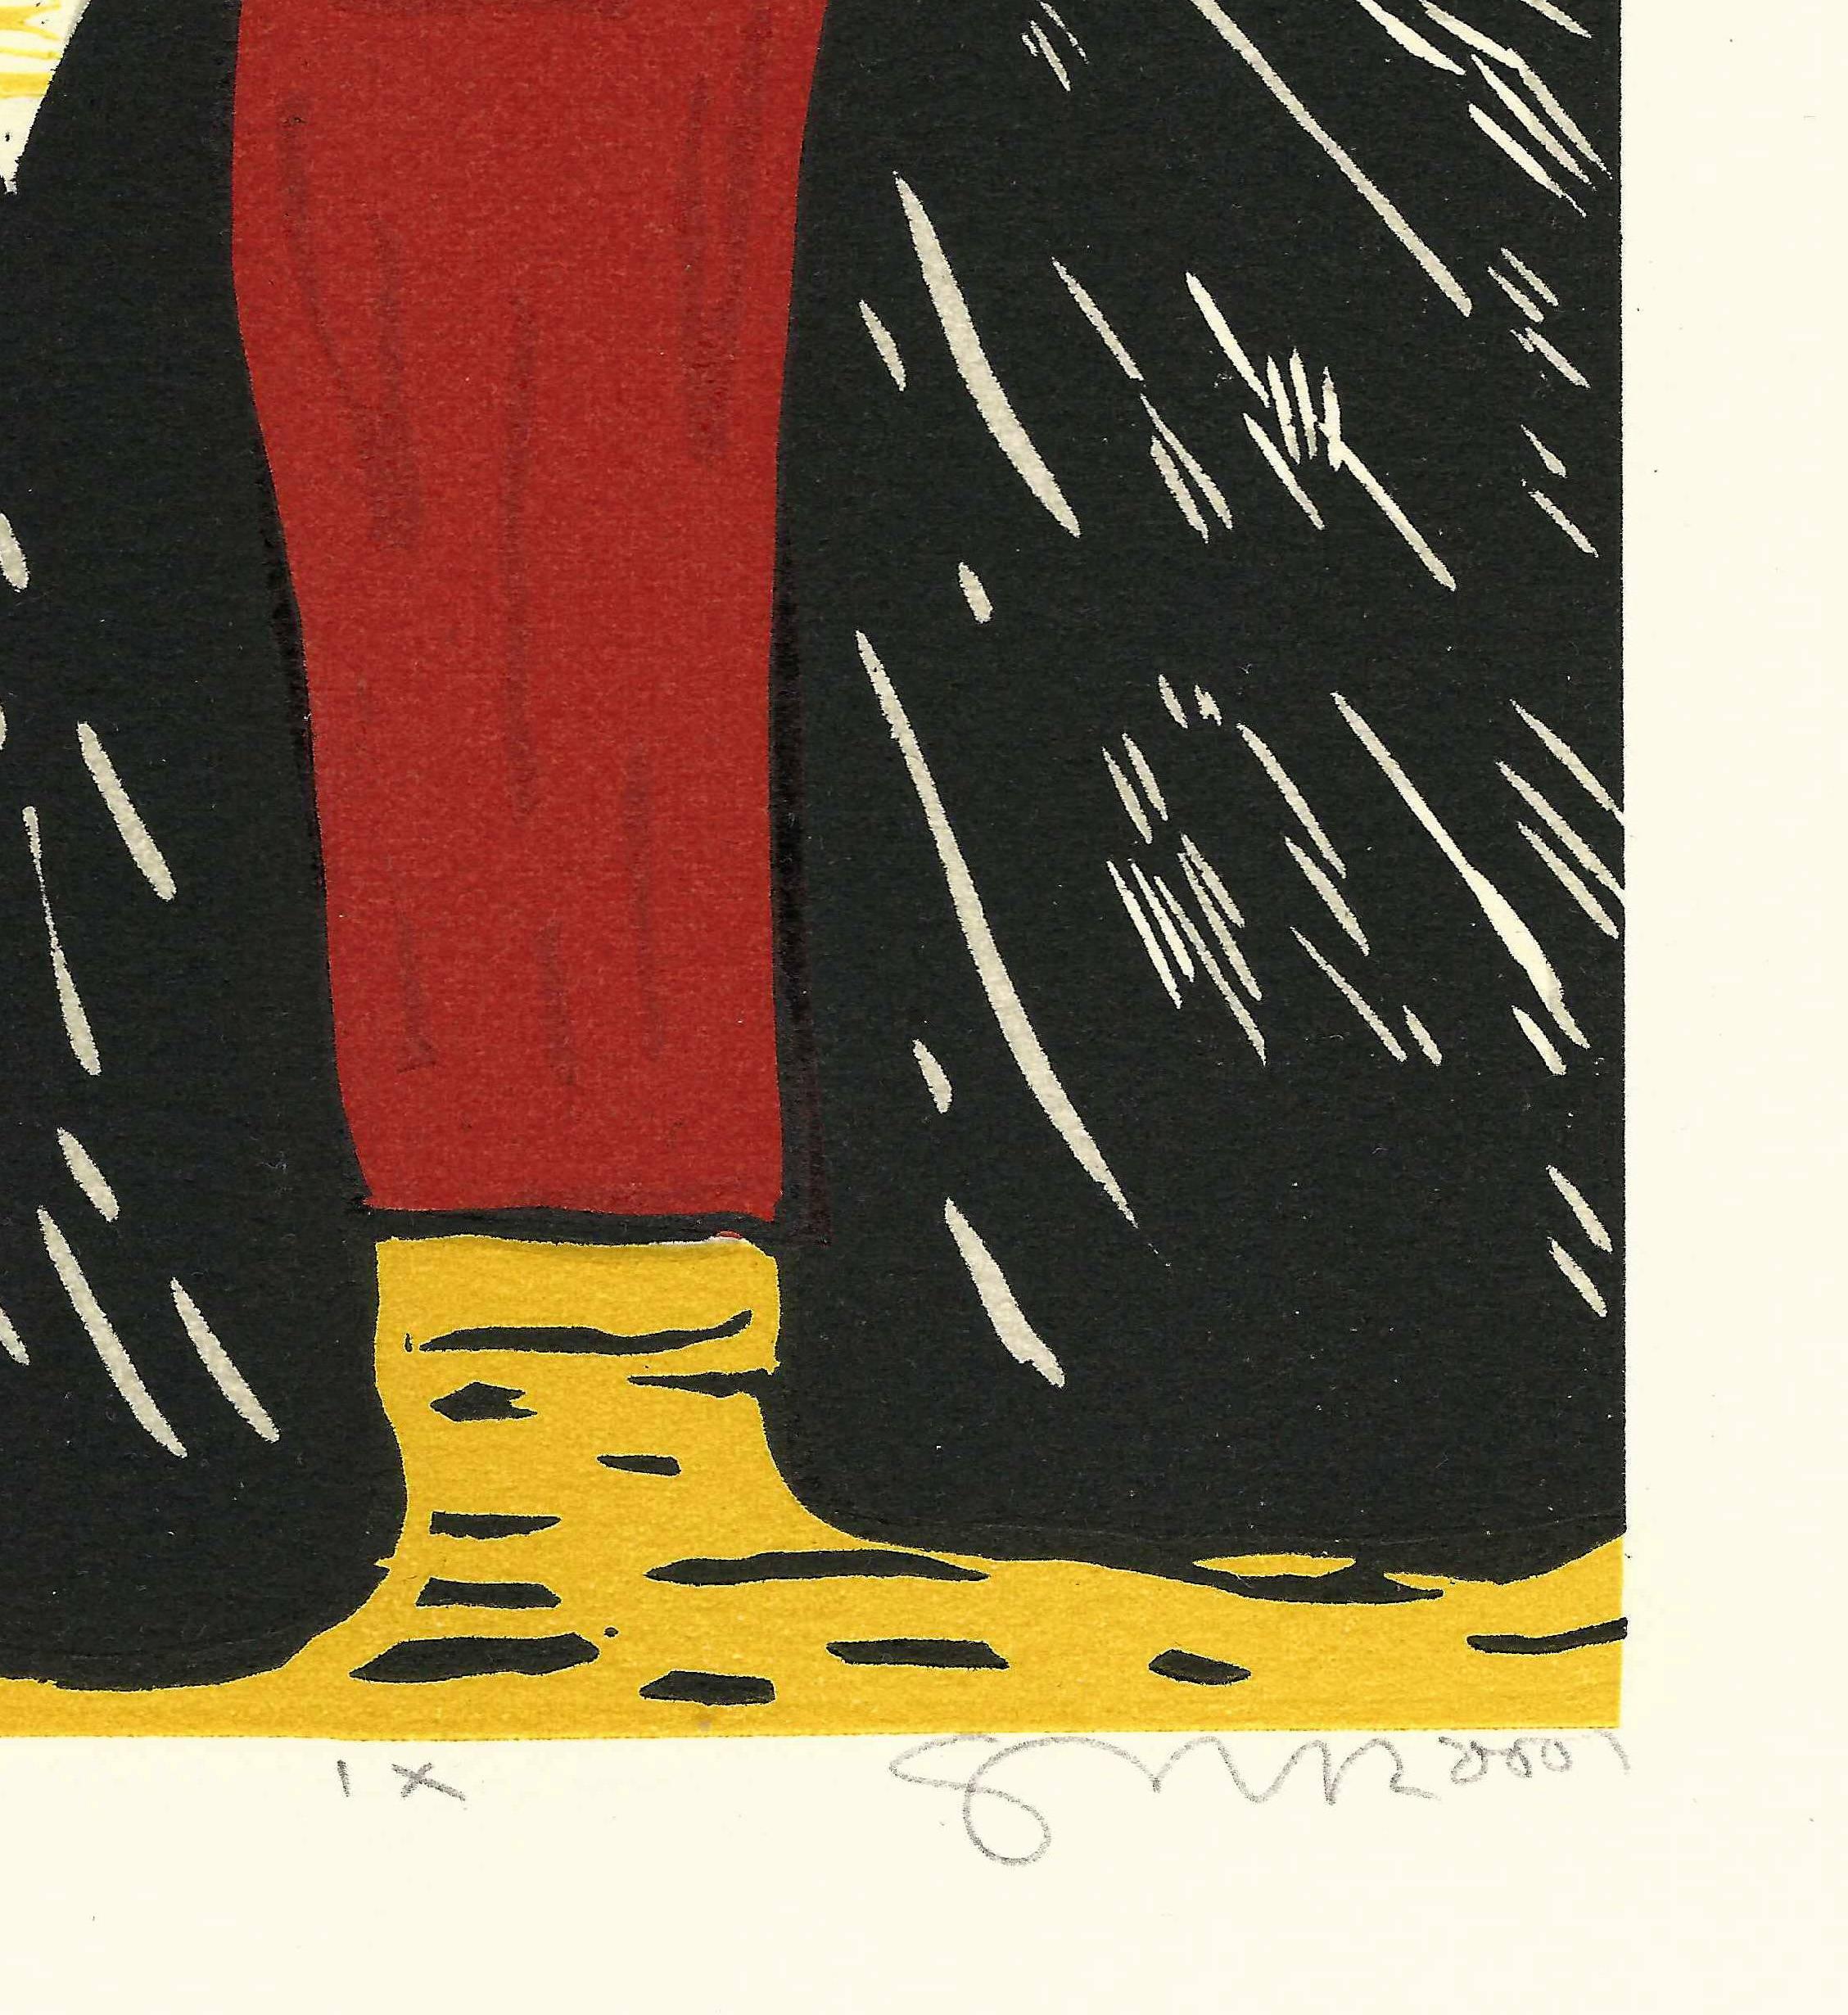 Tormenta (Storm), Movement IX, multi-colored linocut - Contemporary Print by Gronk Nicandro